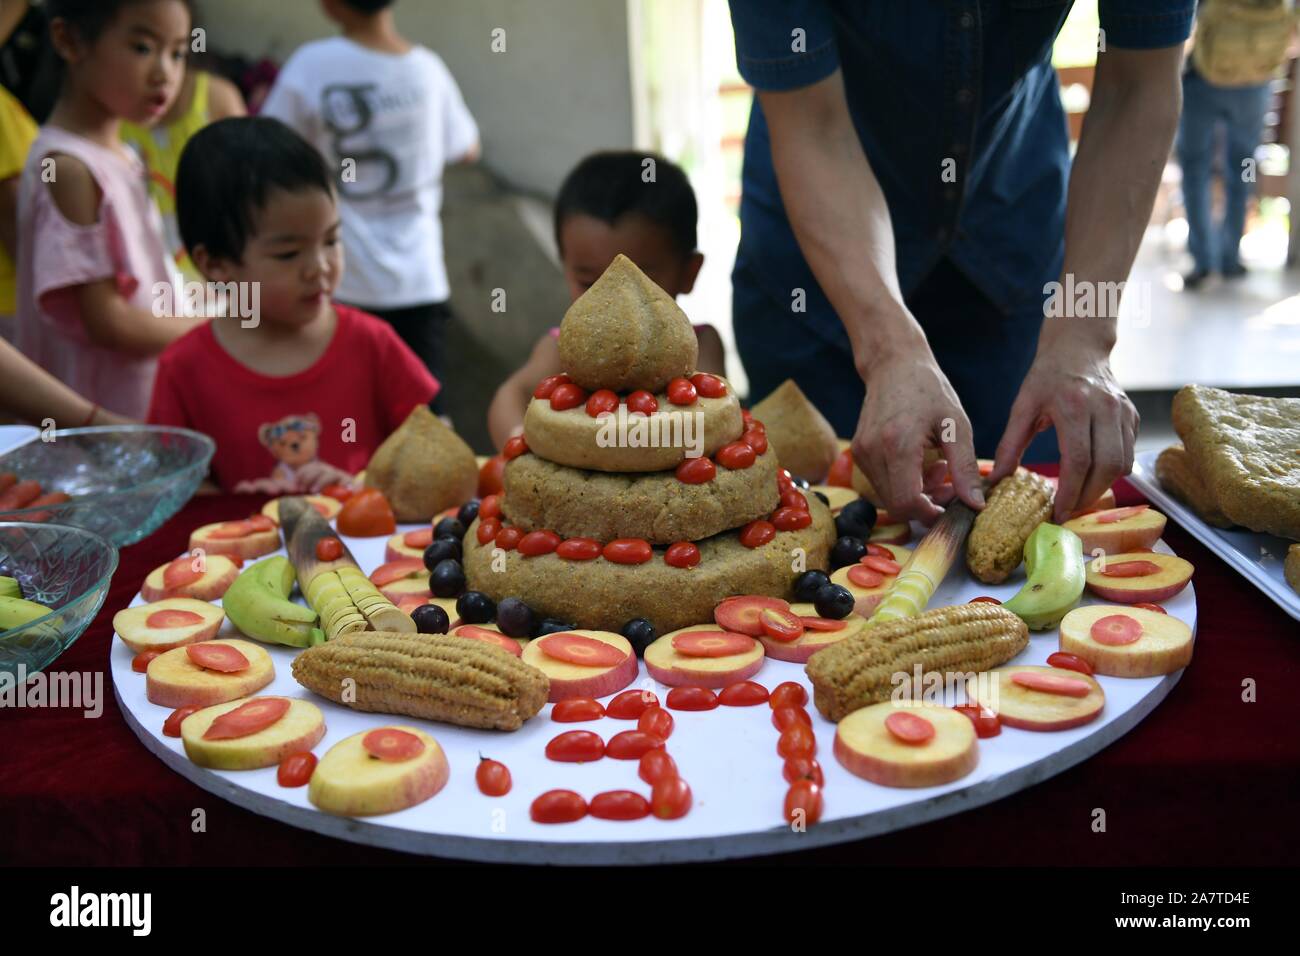 Tourists Use Fodder And Fruits To Make A Birthday Cake For Giant Panda Xin Xing During Her 37th 4226